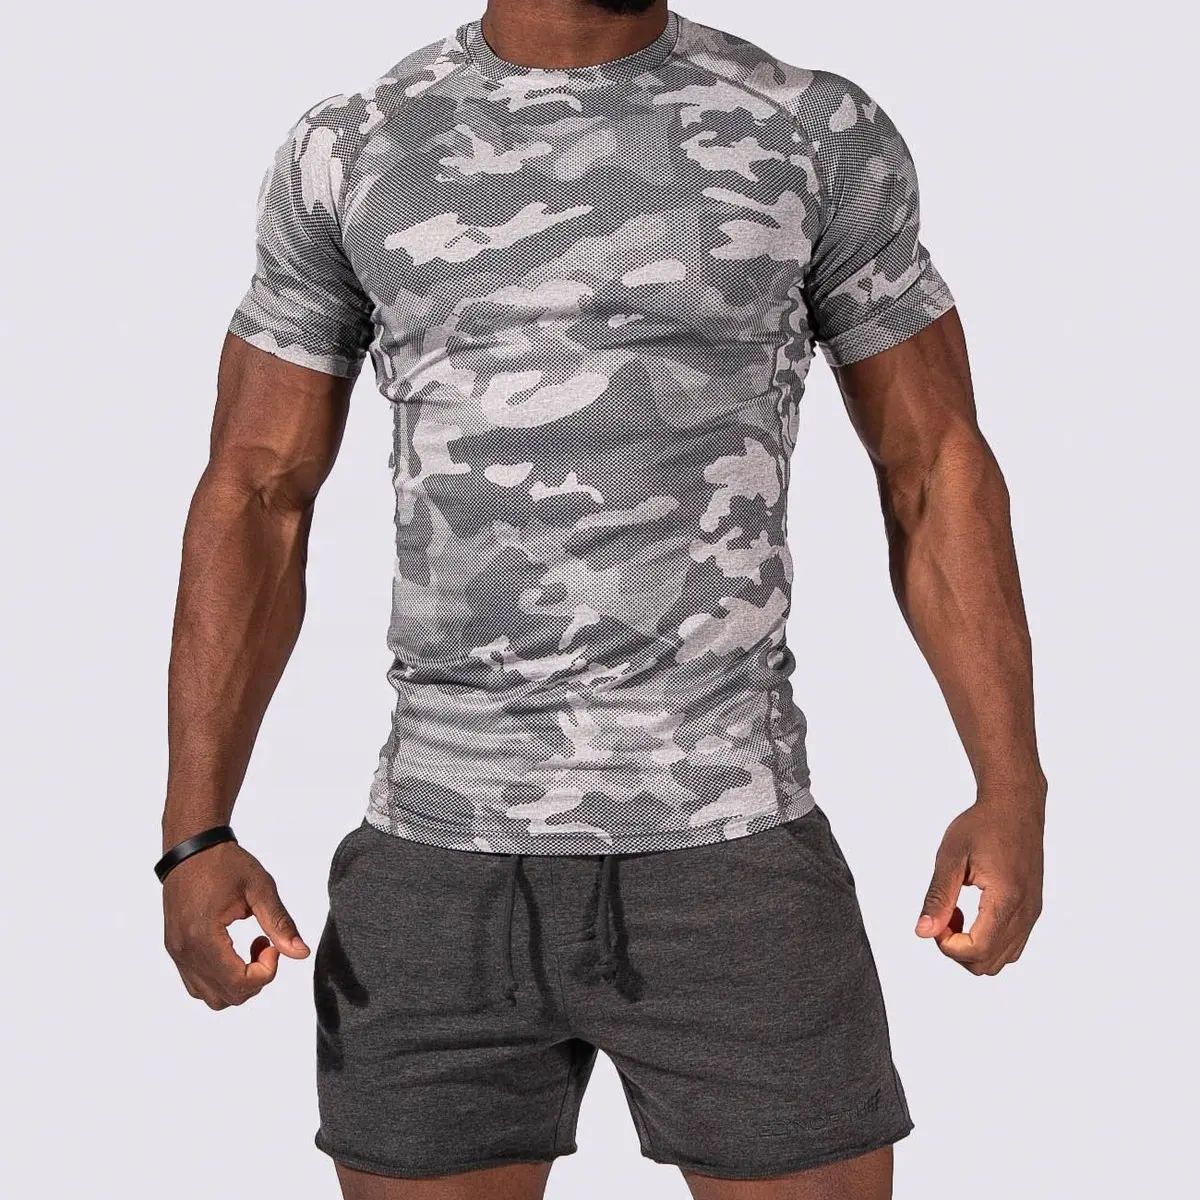 Camouflage sweat wicking t shirt for men breathable sports short sleeve fitness gym top